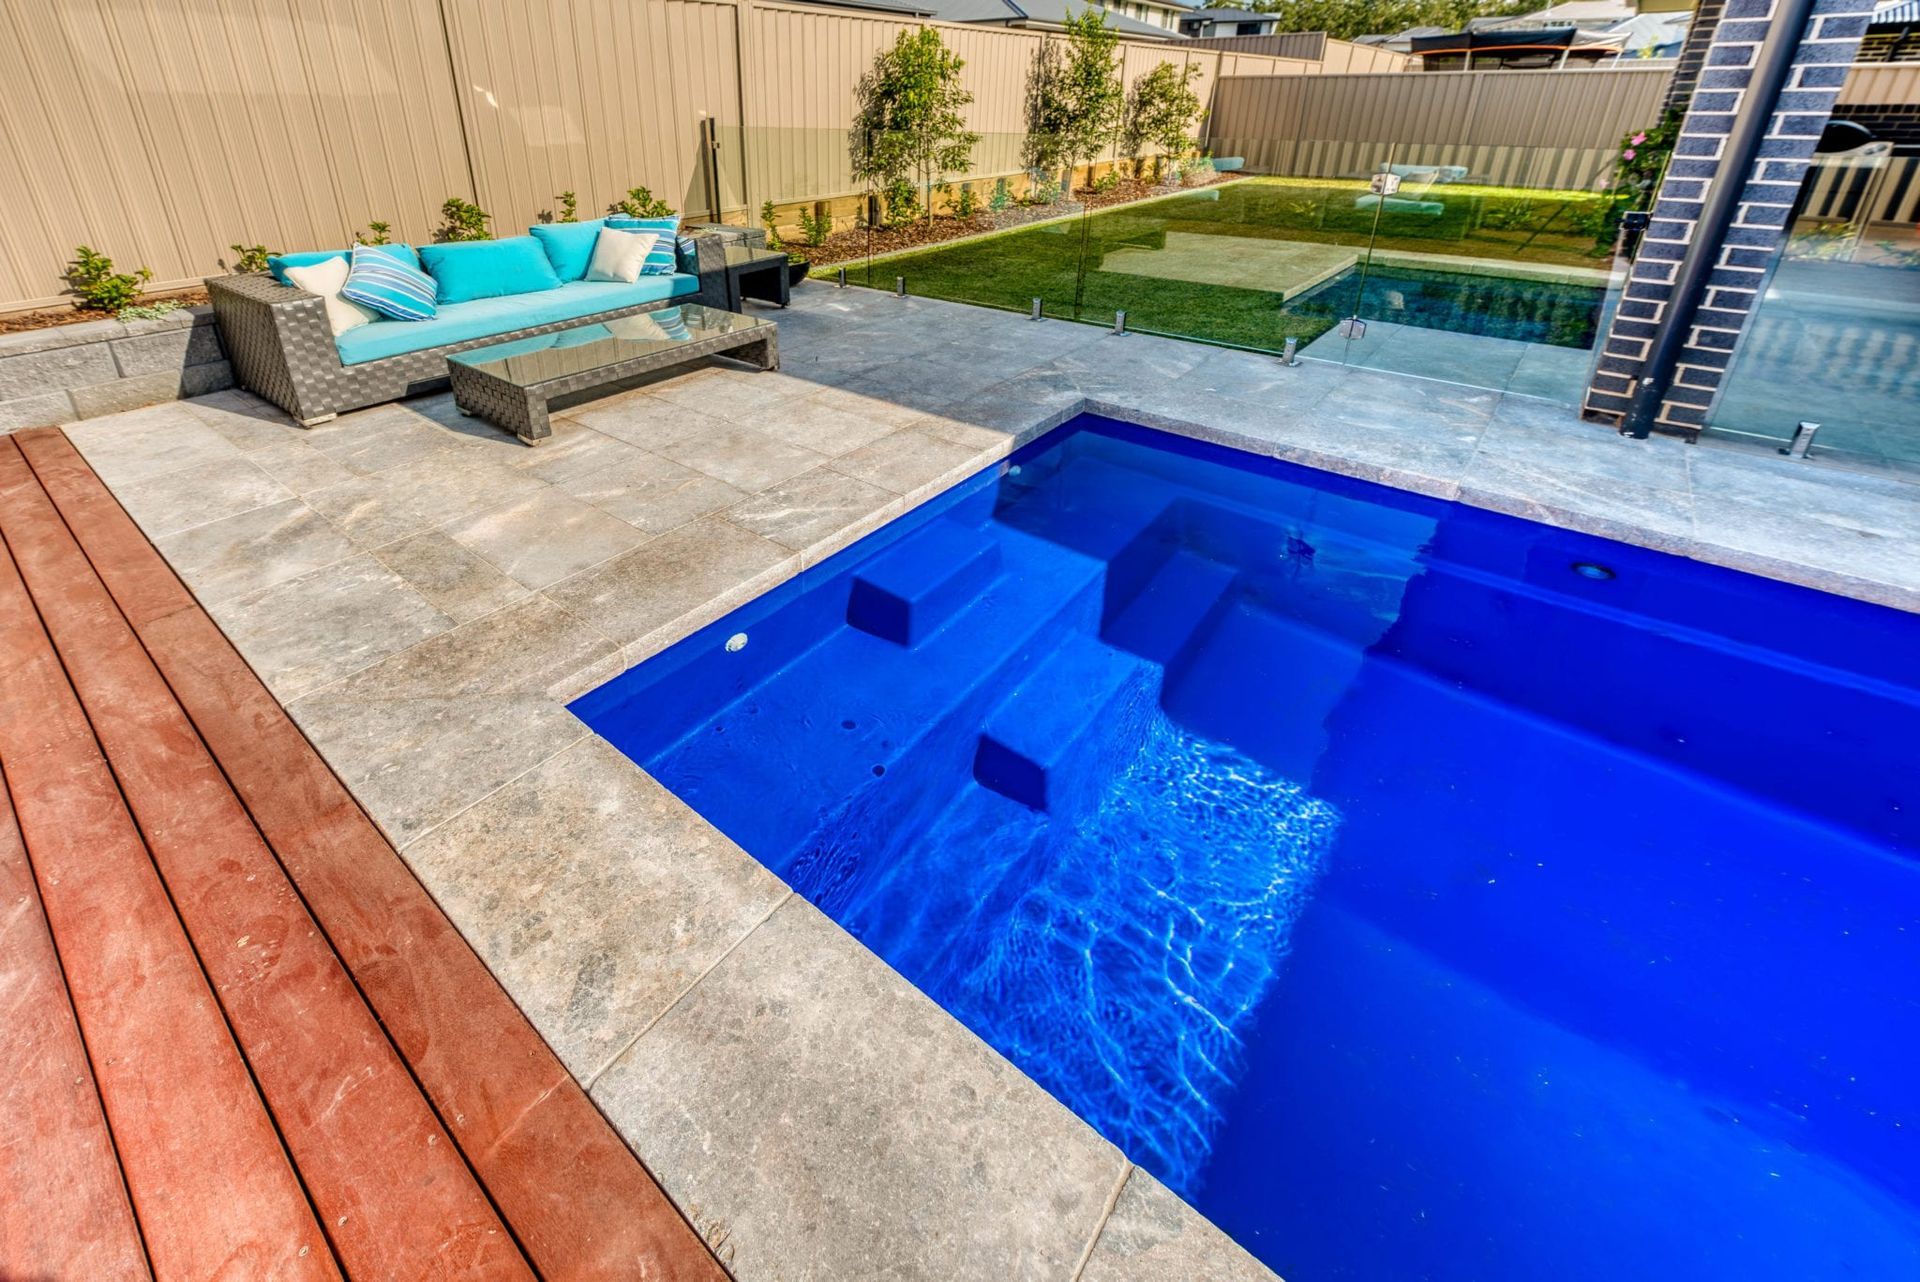 Classic Pool design by Masterbuilt Pools in Armidale NSW area